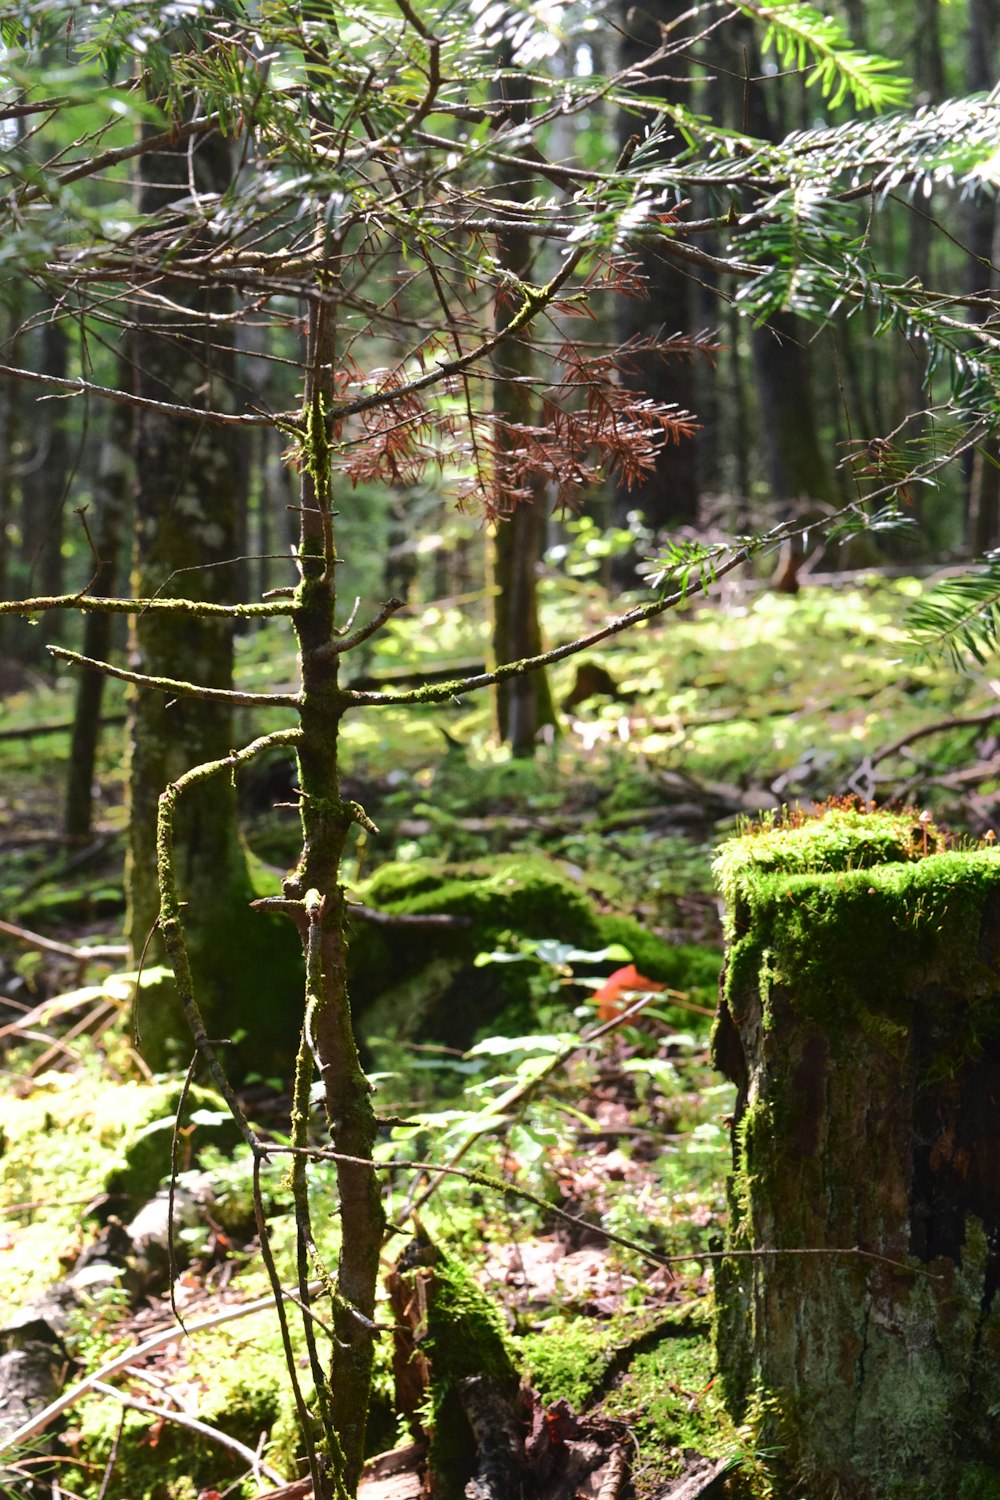 a mossy tree stump in the middle of a forest